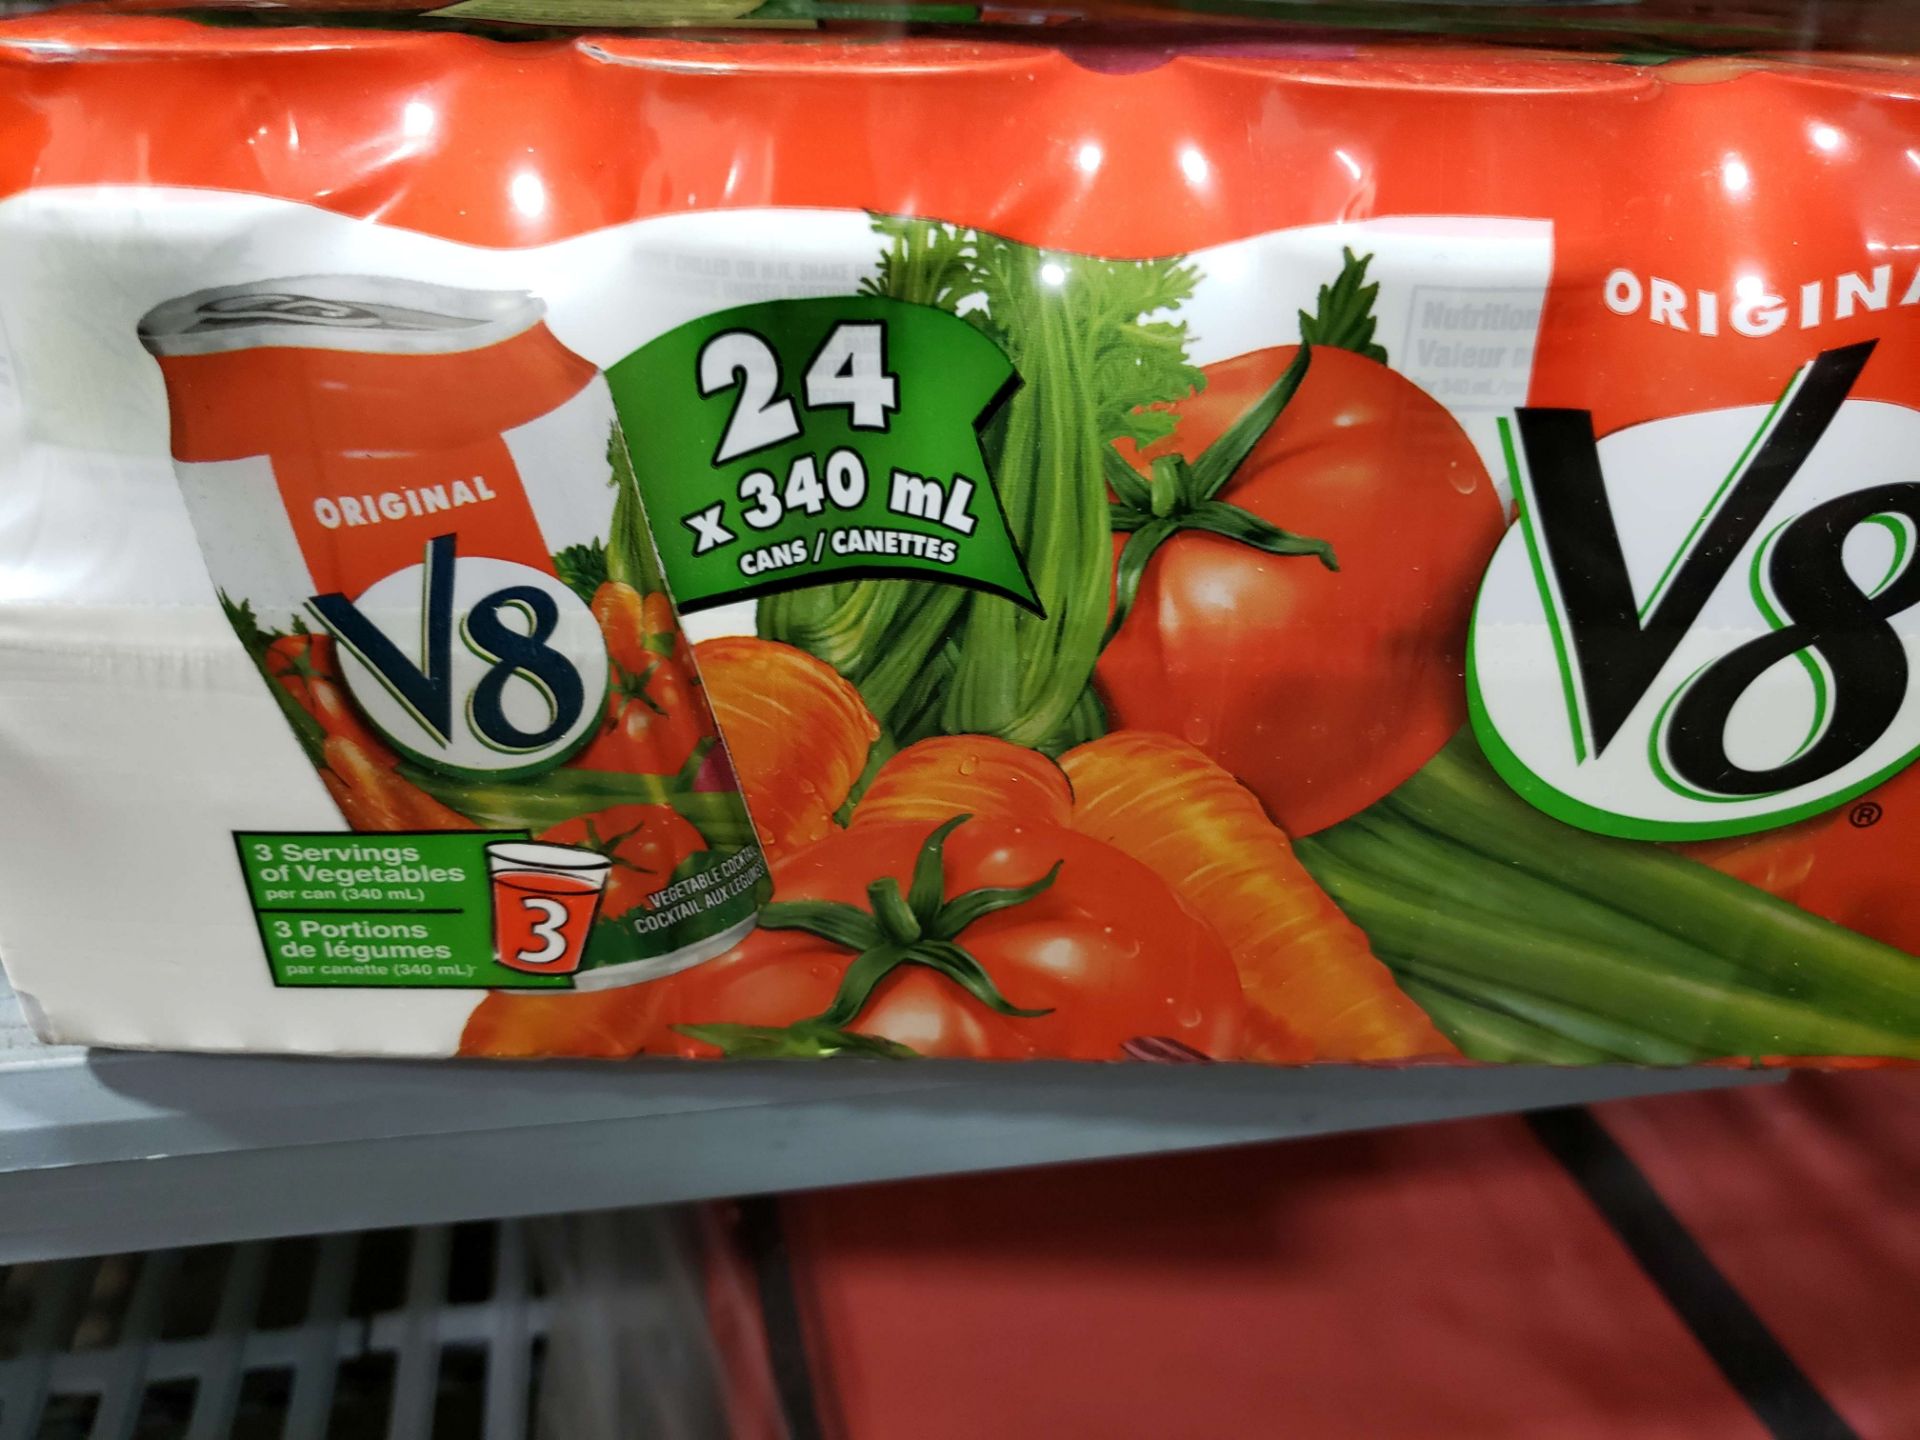 V8 Juice - 24 x 340 ml Cans - Image 2 of 2